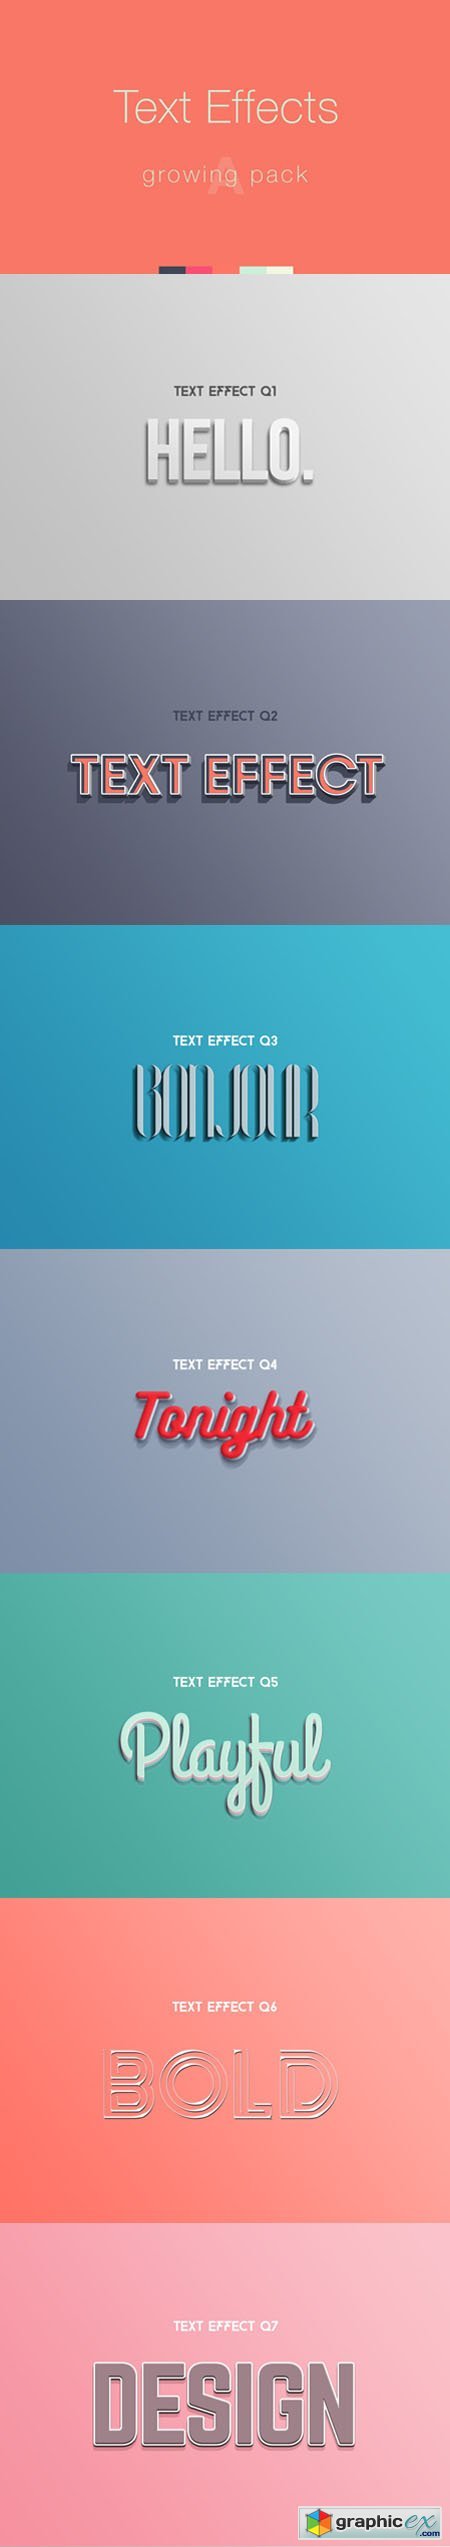 Photoshop Text Effects - Growing Pack